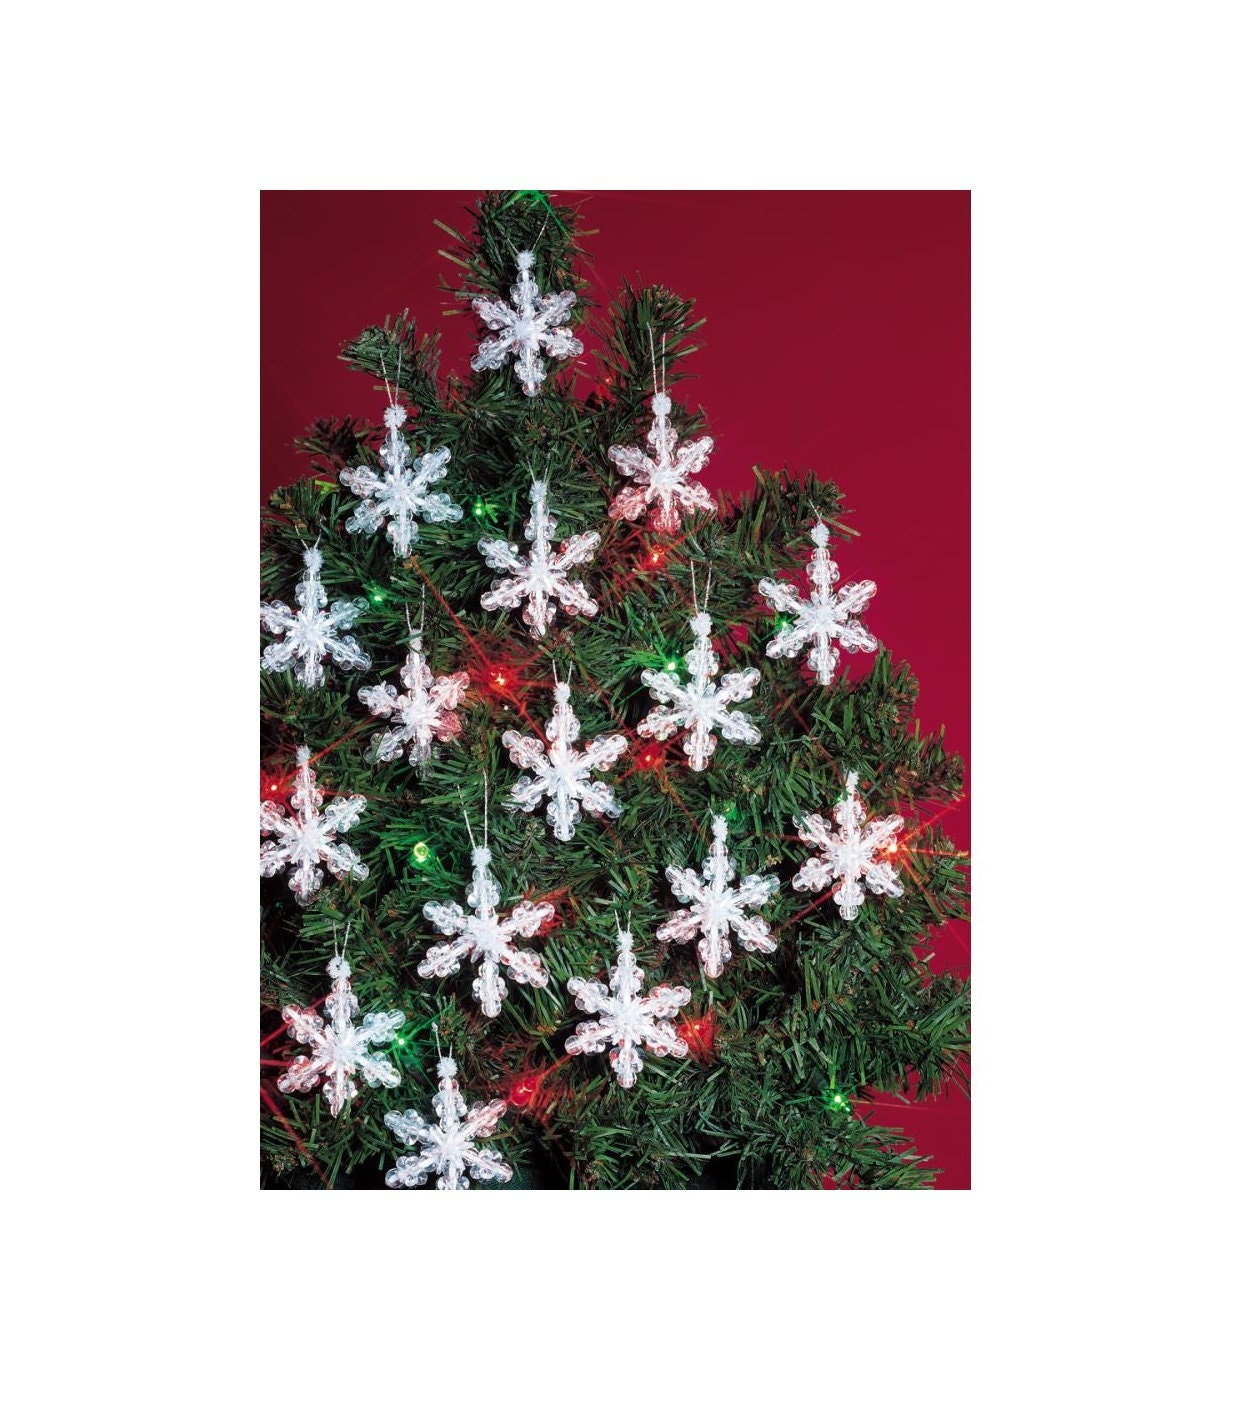 New Mini Snowflakes Christmas Ornaments From Nestled Pines 